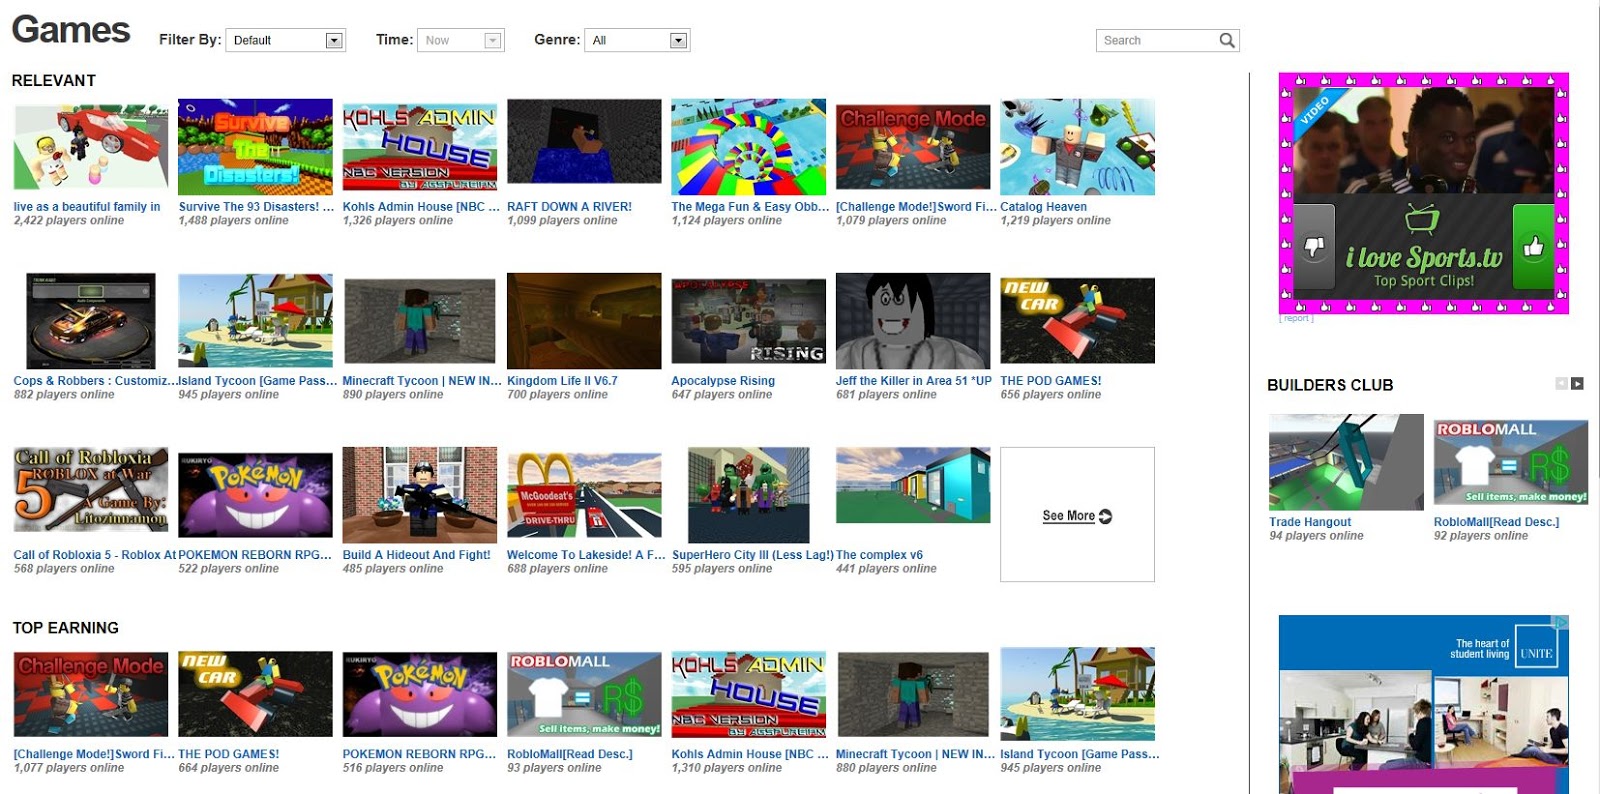 Unofficial Roblox Roblox Games Page Massive Layout Update New Look 2013 - roblox af